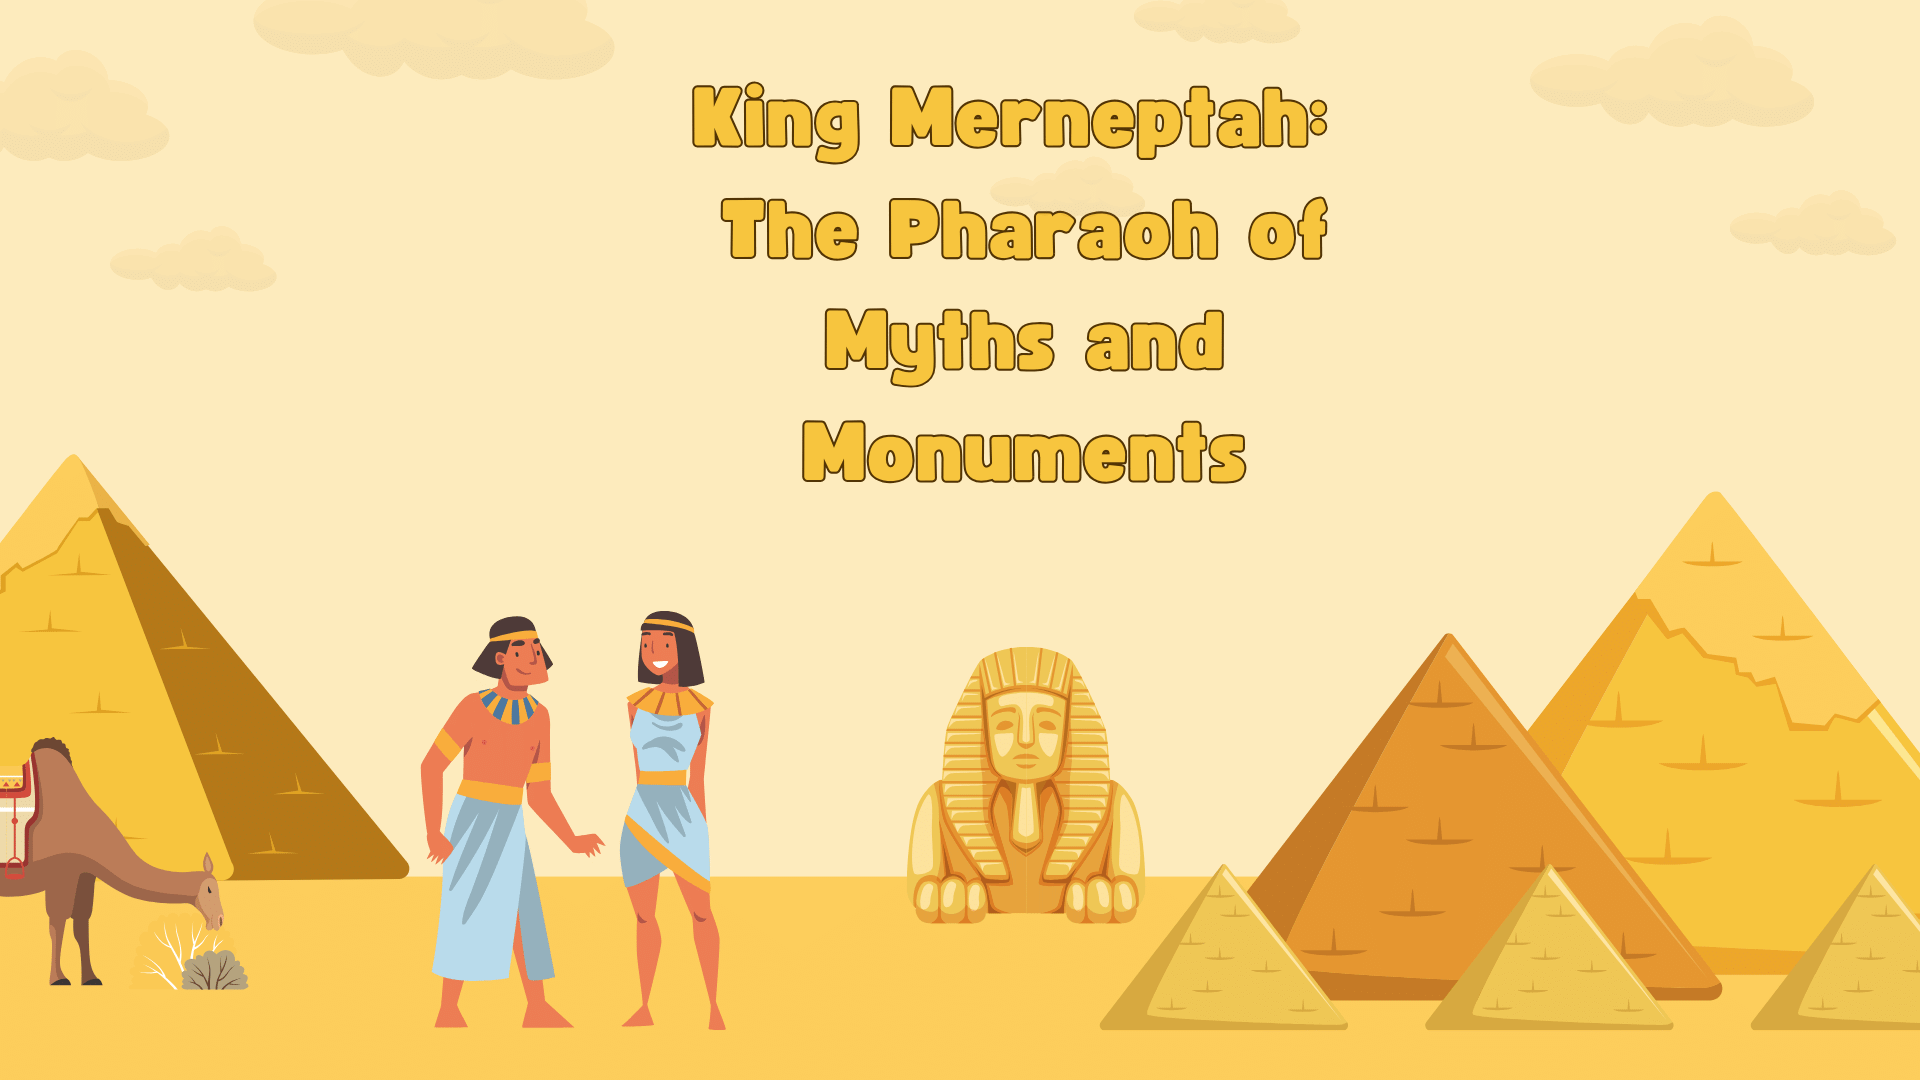 King Merneptah: The Pharaoh of Myths and Monuments